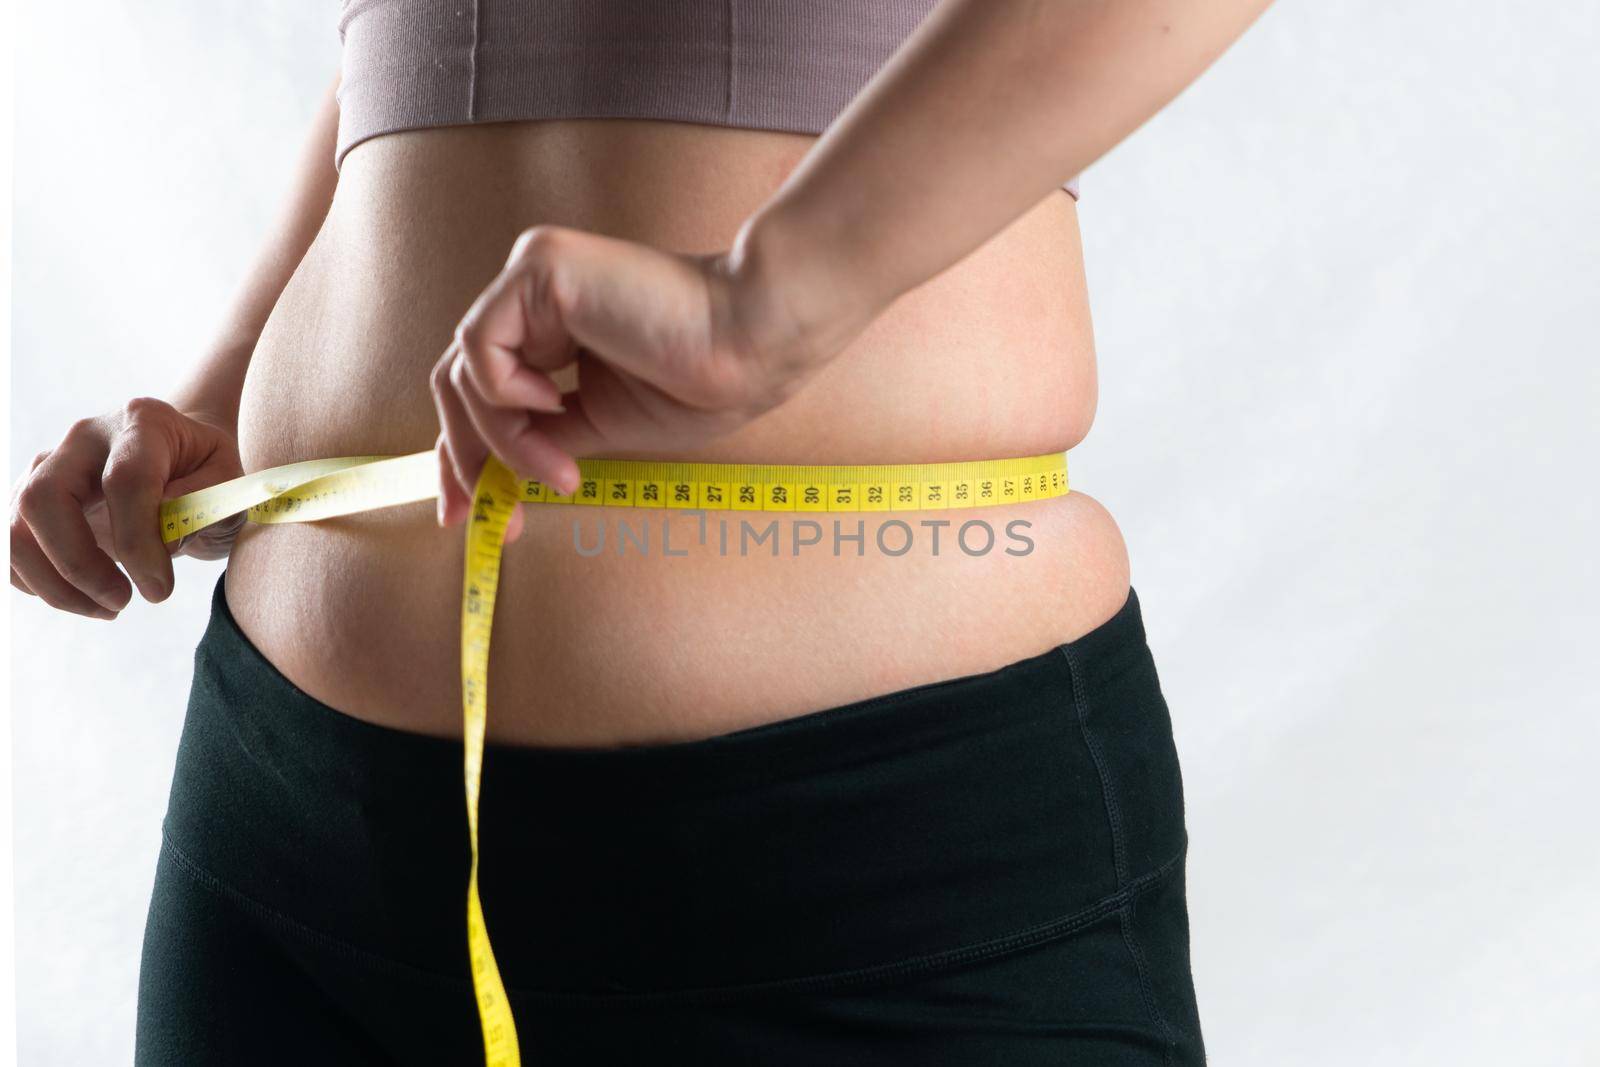 young woman measuring her belly waist with measure tape, woman diet lifestyle concept by psodaz